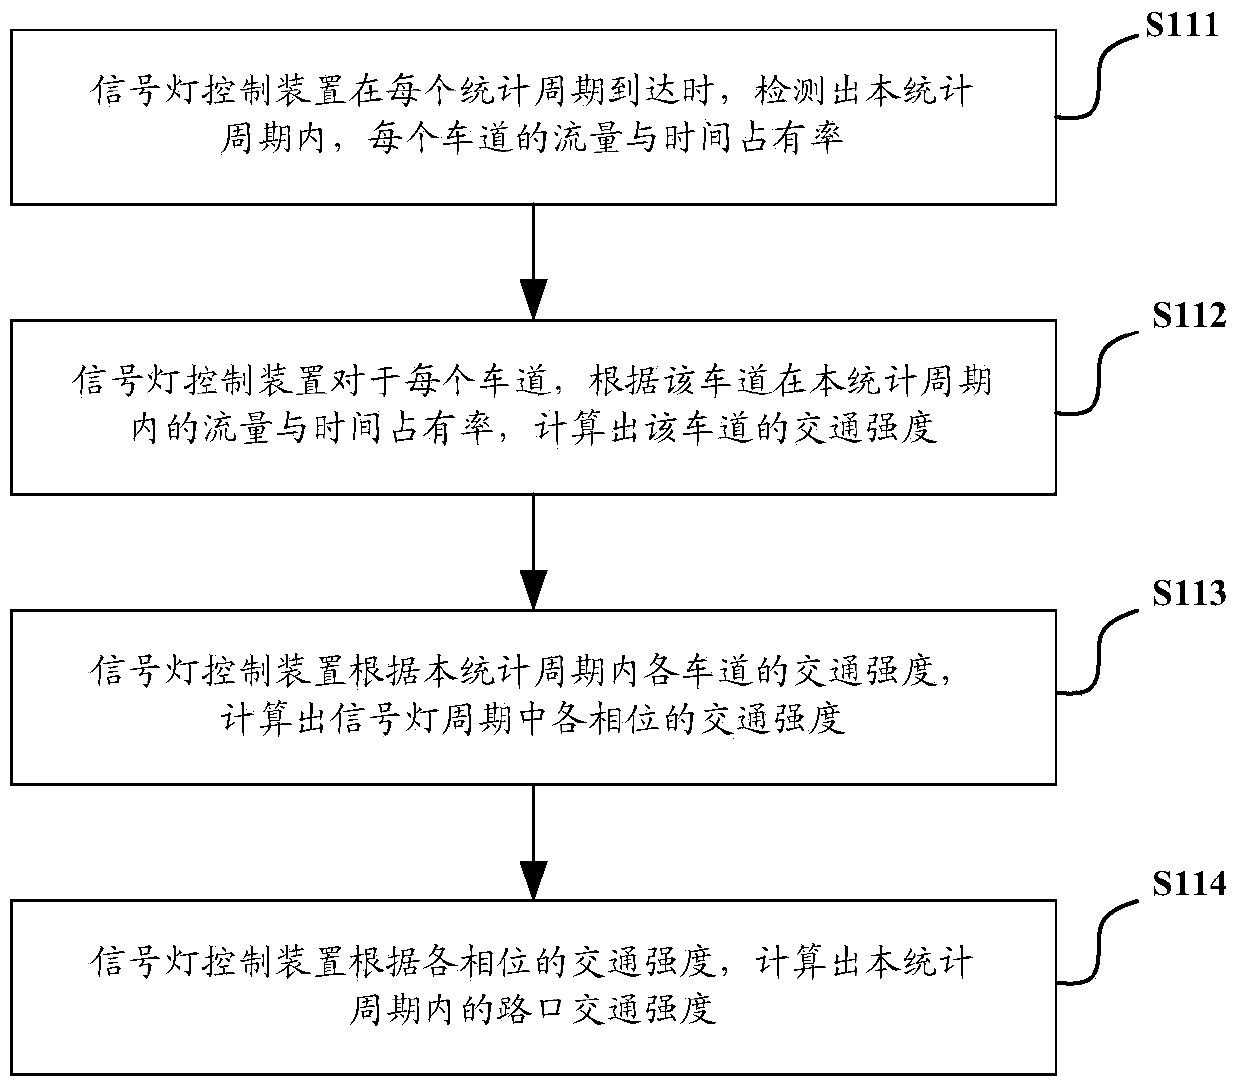 Crossing traffic jam judging and control method and system based on sensing detectors